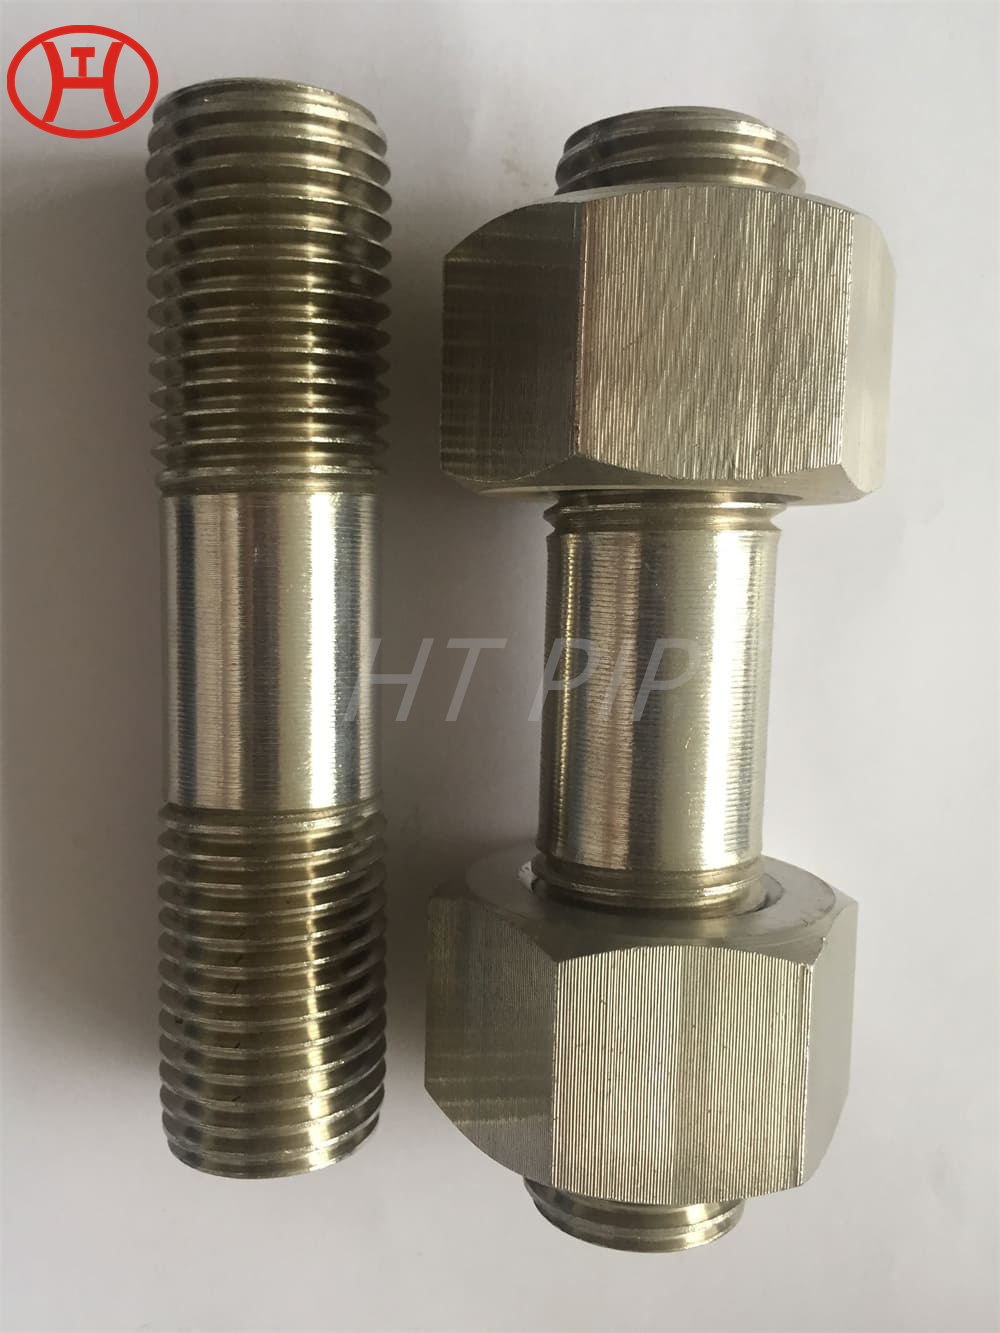 DIN931 UNS N08810-Incoloy 800H partial thread Nature Nickel Alloy hex bolt 1-2-13 Incoloy 800H hex bolt m30 black hex bolt